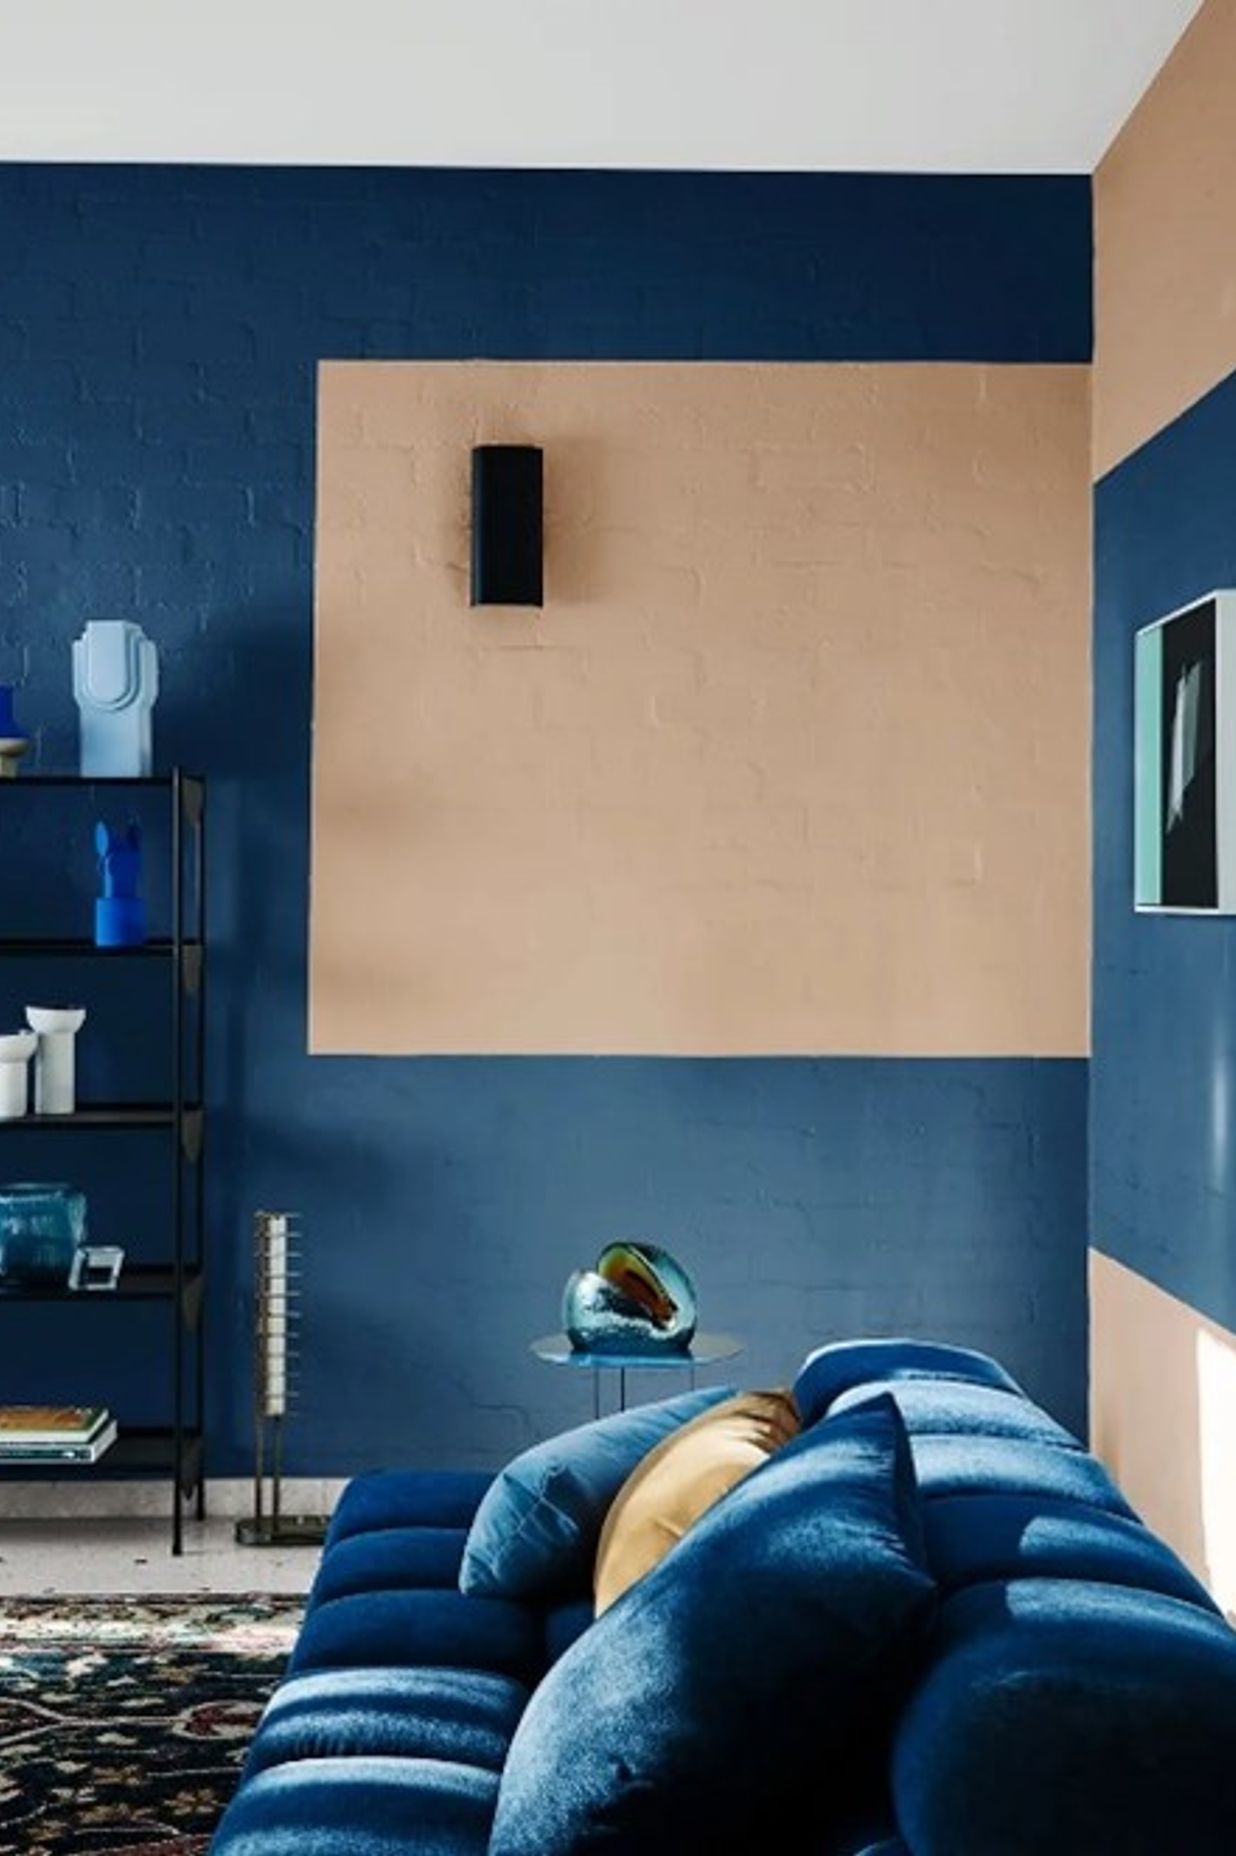 Latest style trends and advice from Dulux®